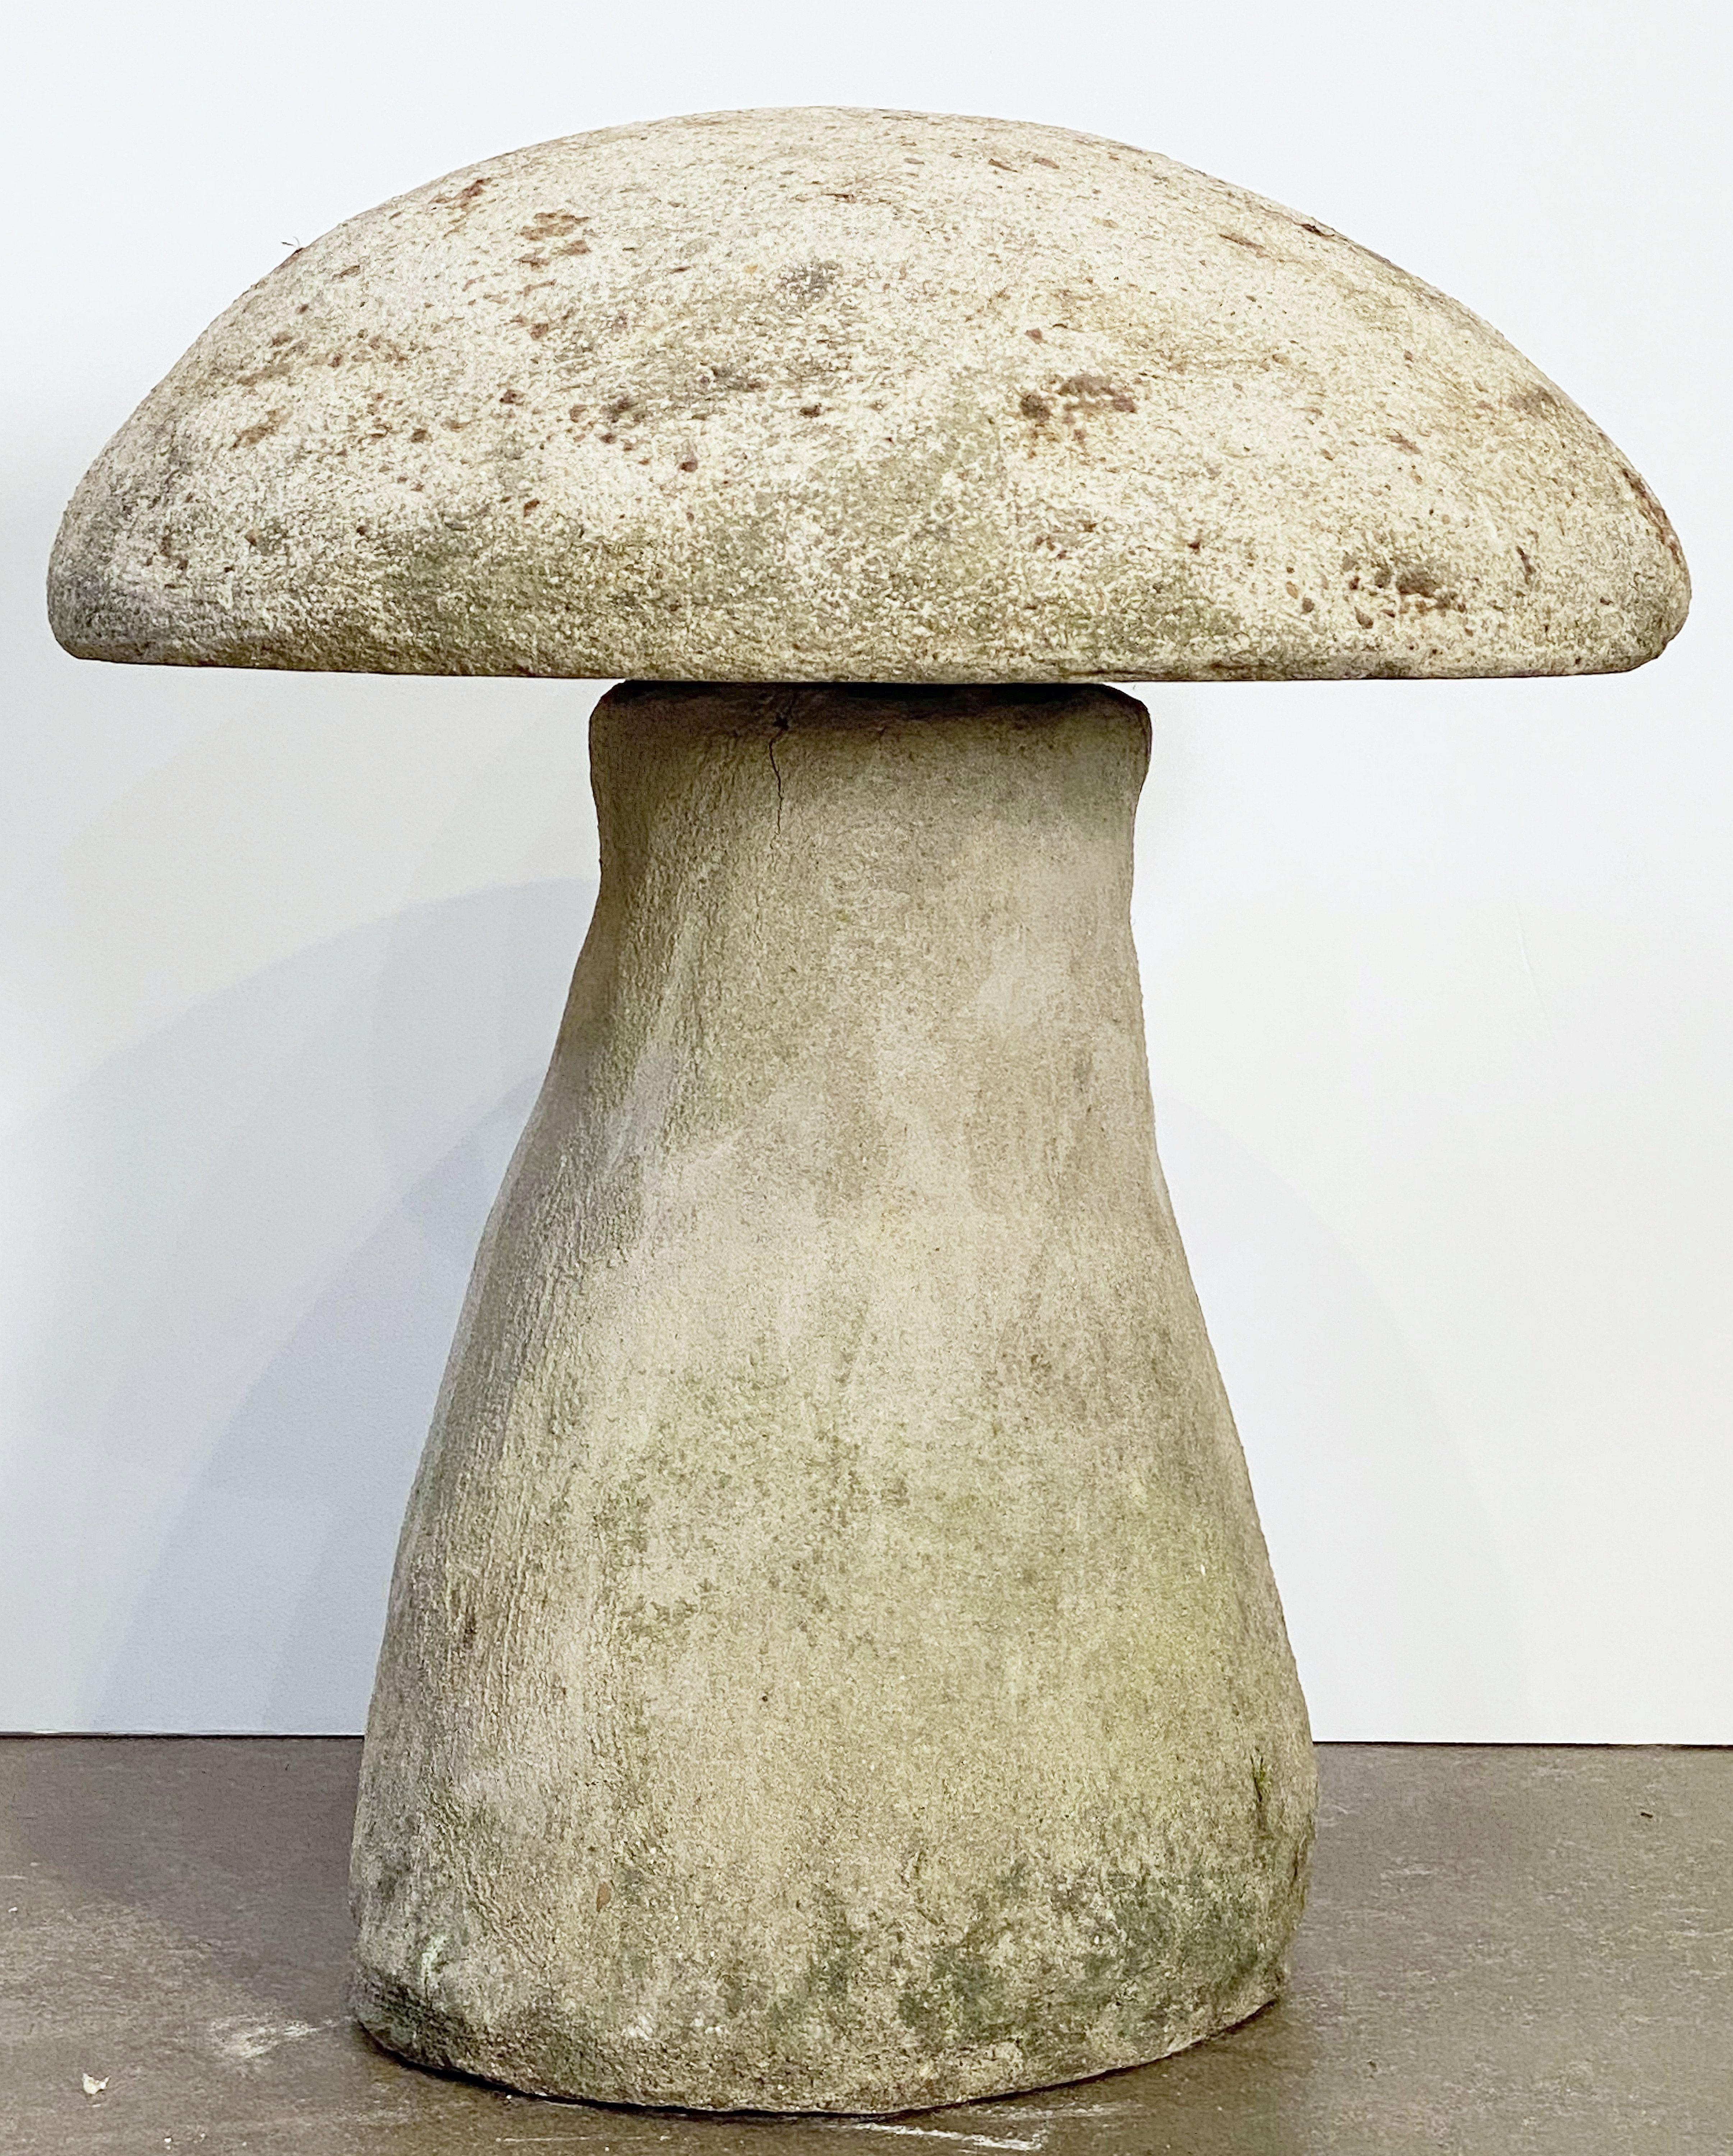 A handsome English garden stone feature of composition stone, featuring a well-modeled toadstool or mushroom (16 inches height).

With removable top and base for easy shipping. 

Other sizes available.